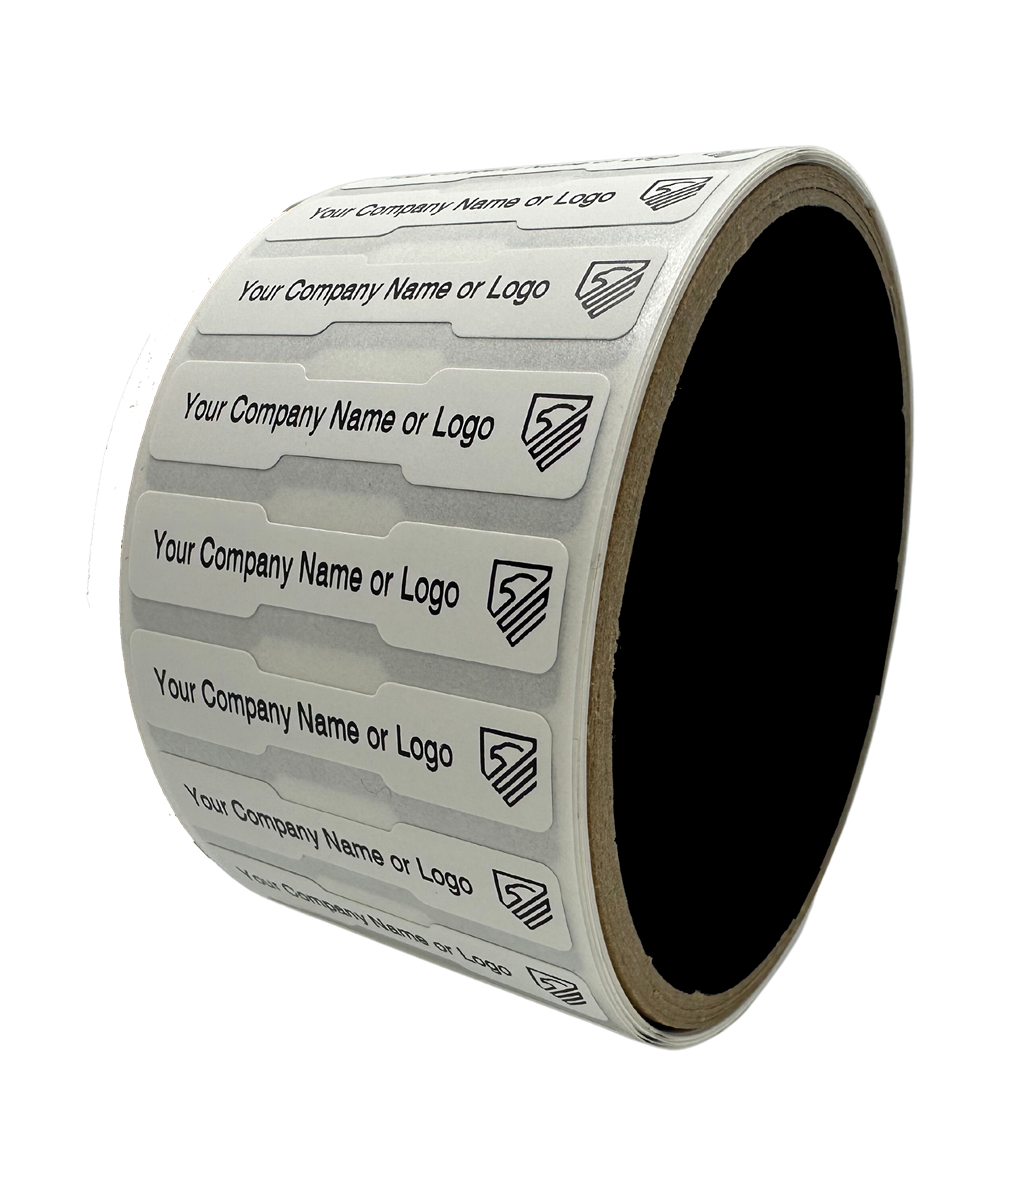 10,000 TamperColor White Custom Printed Security Labels: Tamper Evident, Dogbone Shape Size 1.75" x 0.375 (44mm x 9mm) >Click on item details to customize.